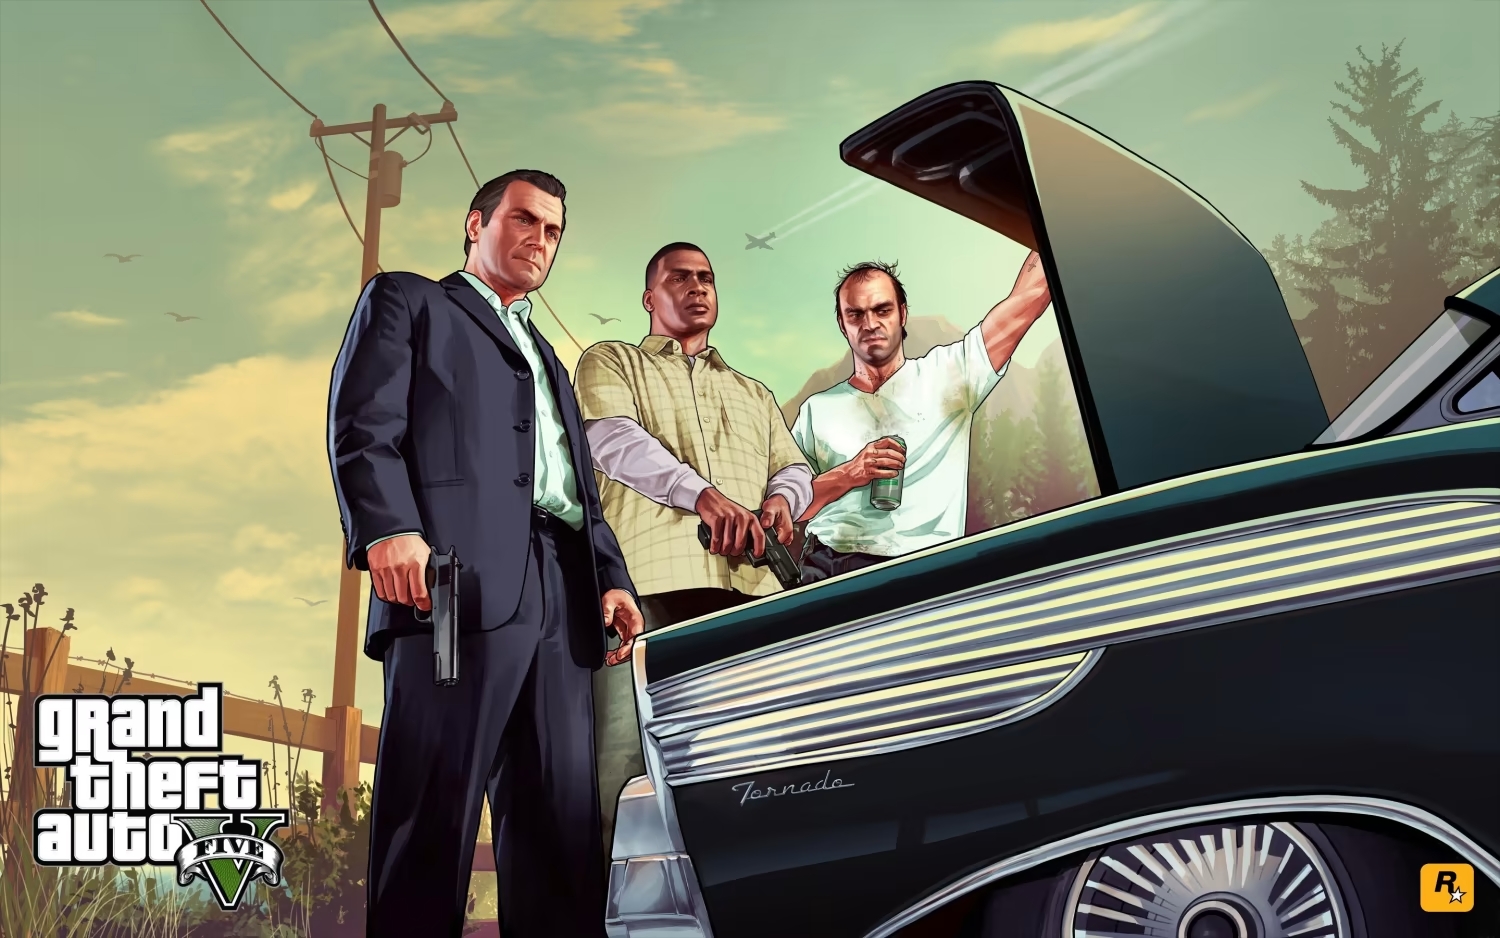 GTA 5: All Cheats for Xbox One and Xbox Series X/S